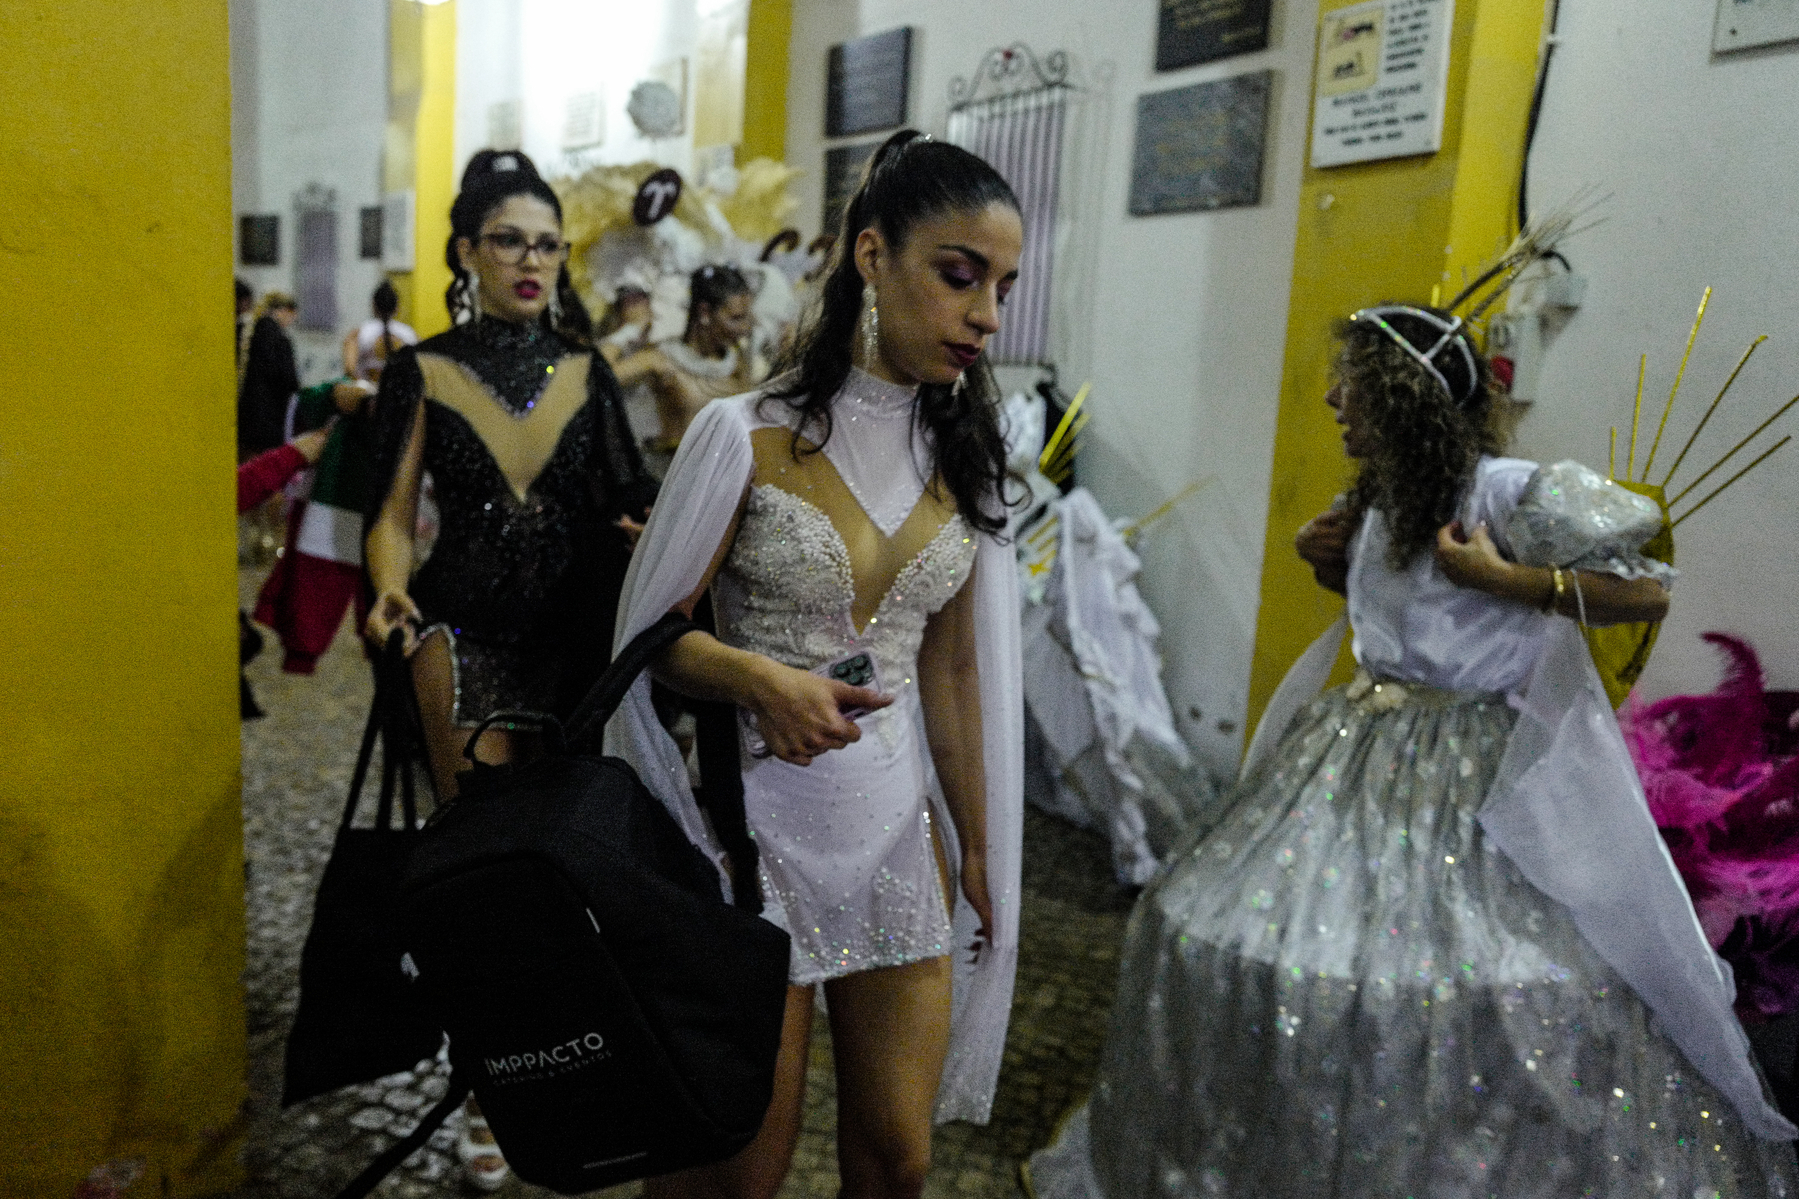 Individuals in elaborate costumes, possibly dancers or performers, are inside a building with yellow walls, preparing for an event. The focus is on a woman wearing a white dress adorned with rhinestones, holding a black shoulder bag.